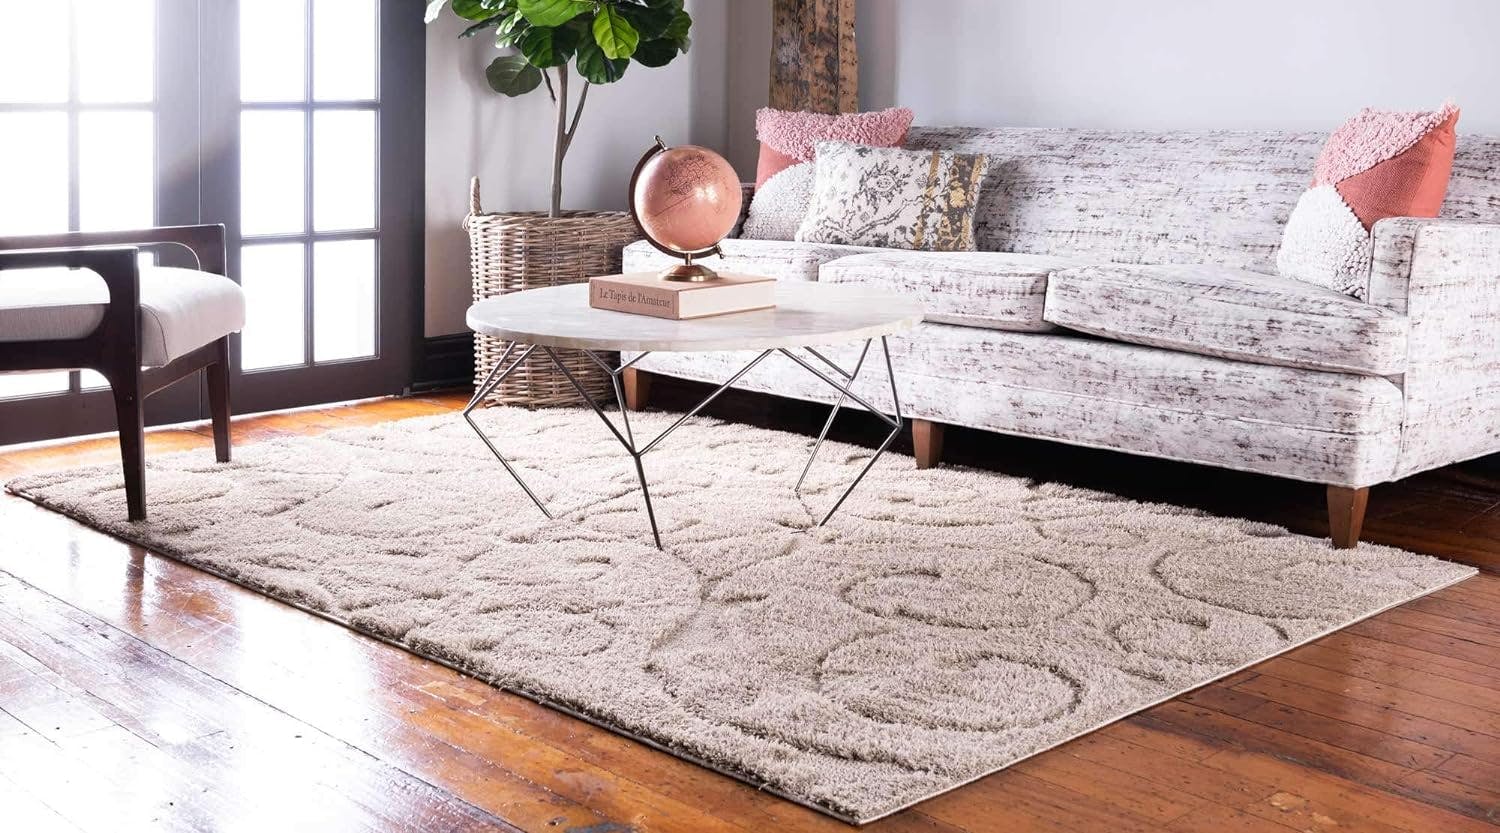 Elegant Beige Floral Shag Area Rug, 4' x 6', Easy Care Synthetic